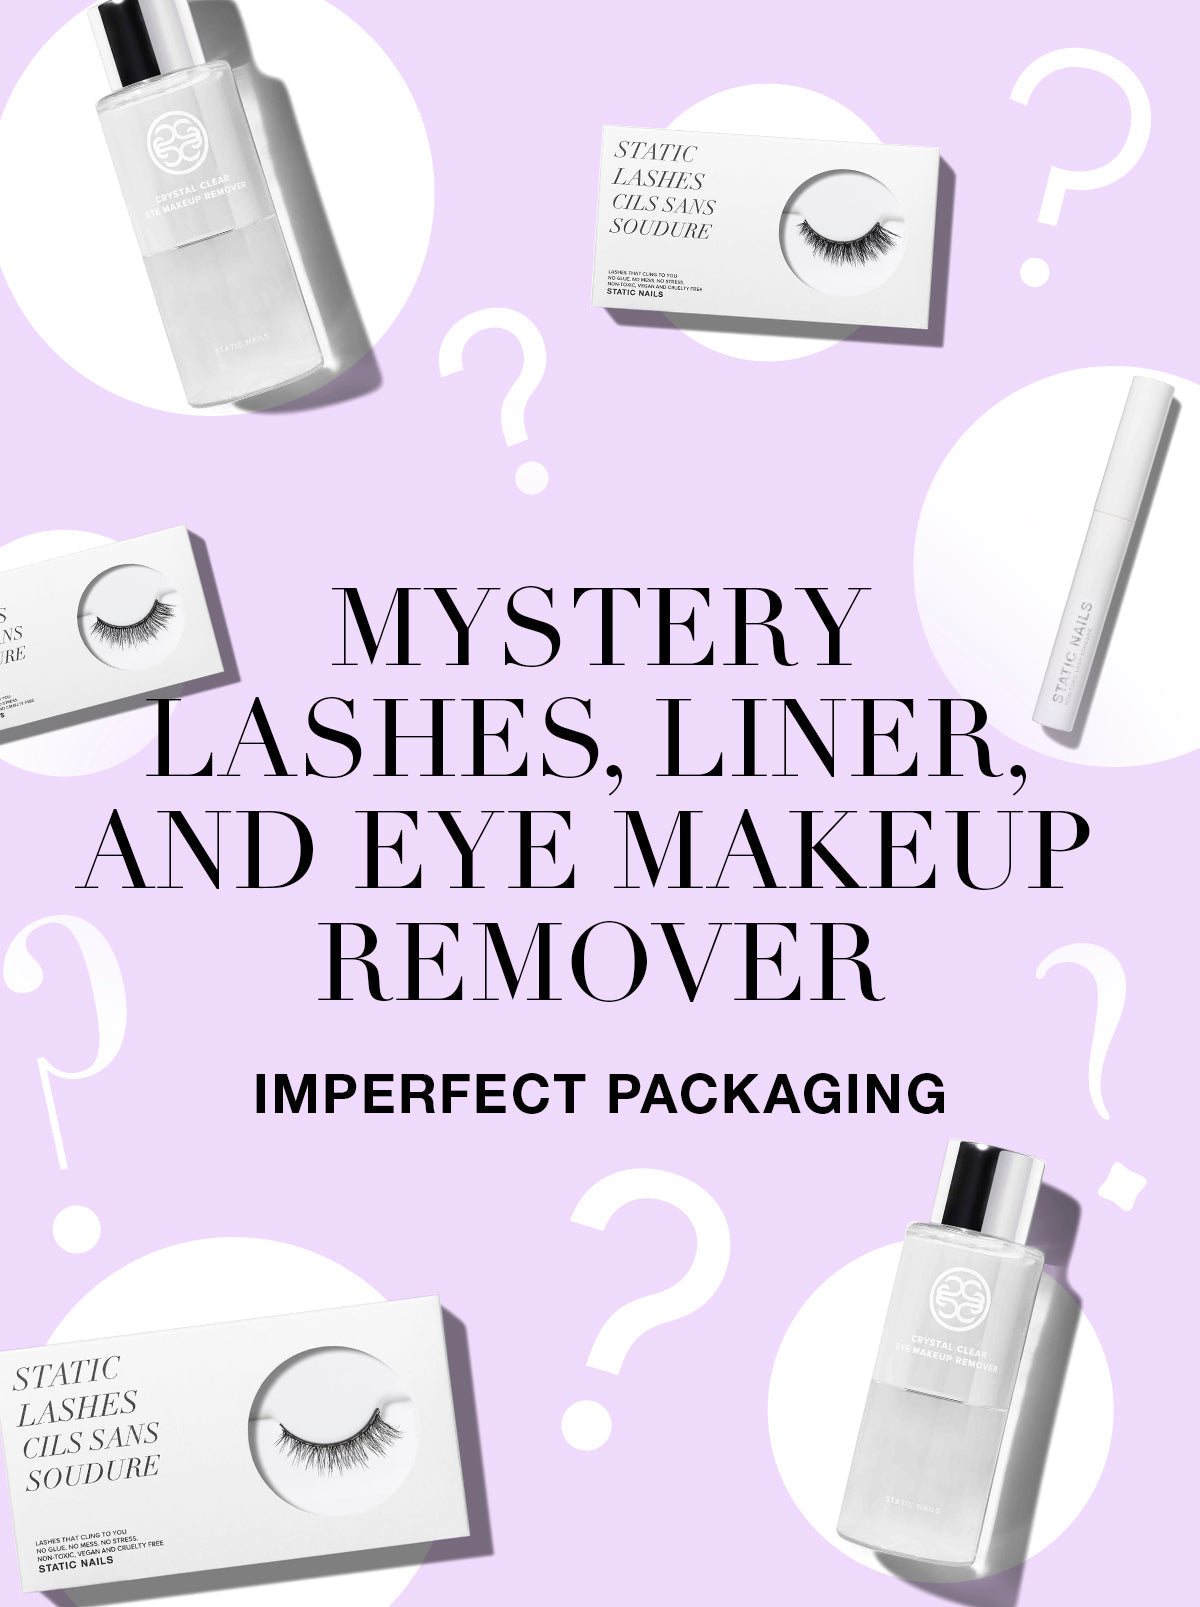 Mystery lashes, liner, and eye makeup remover imperfect packaging